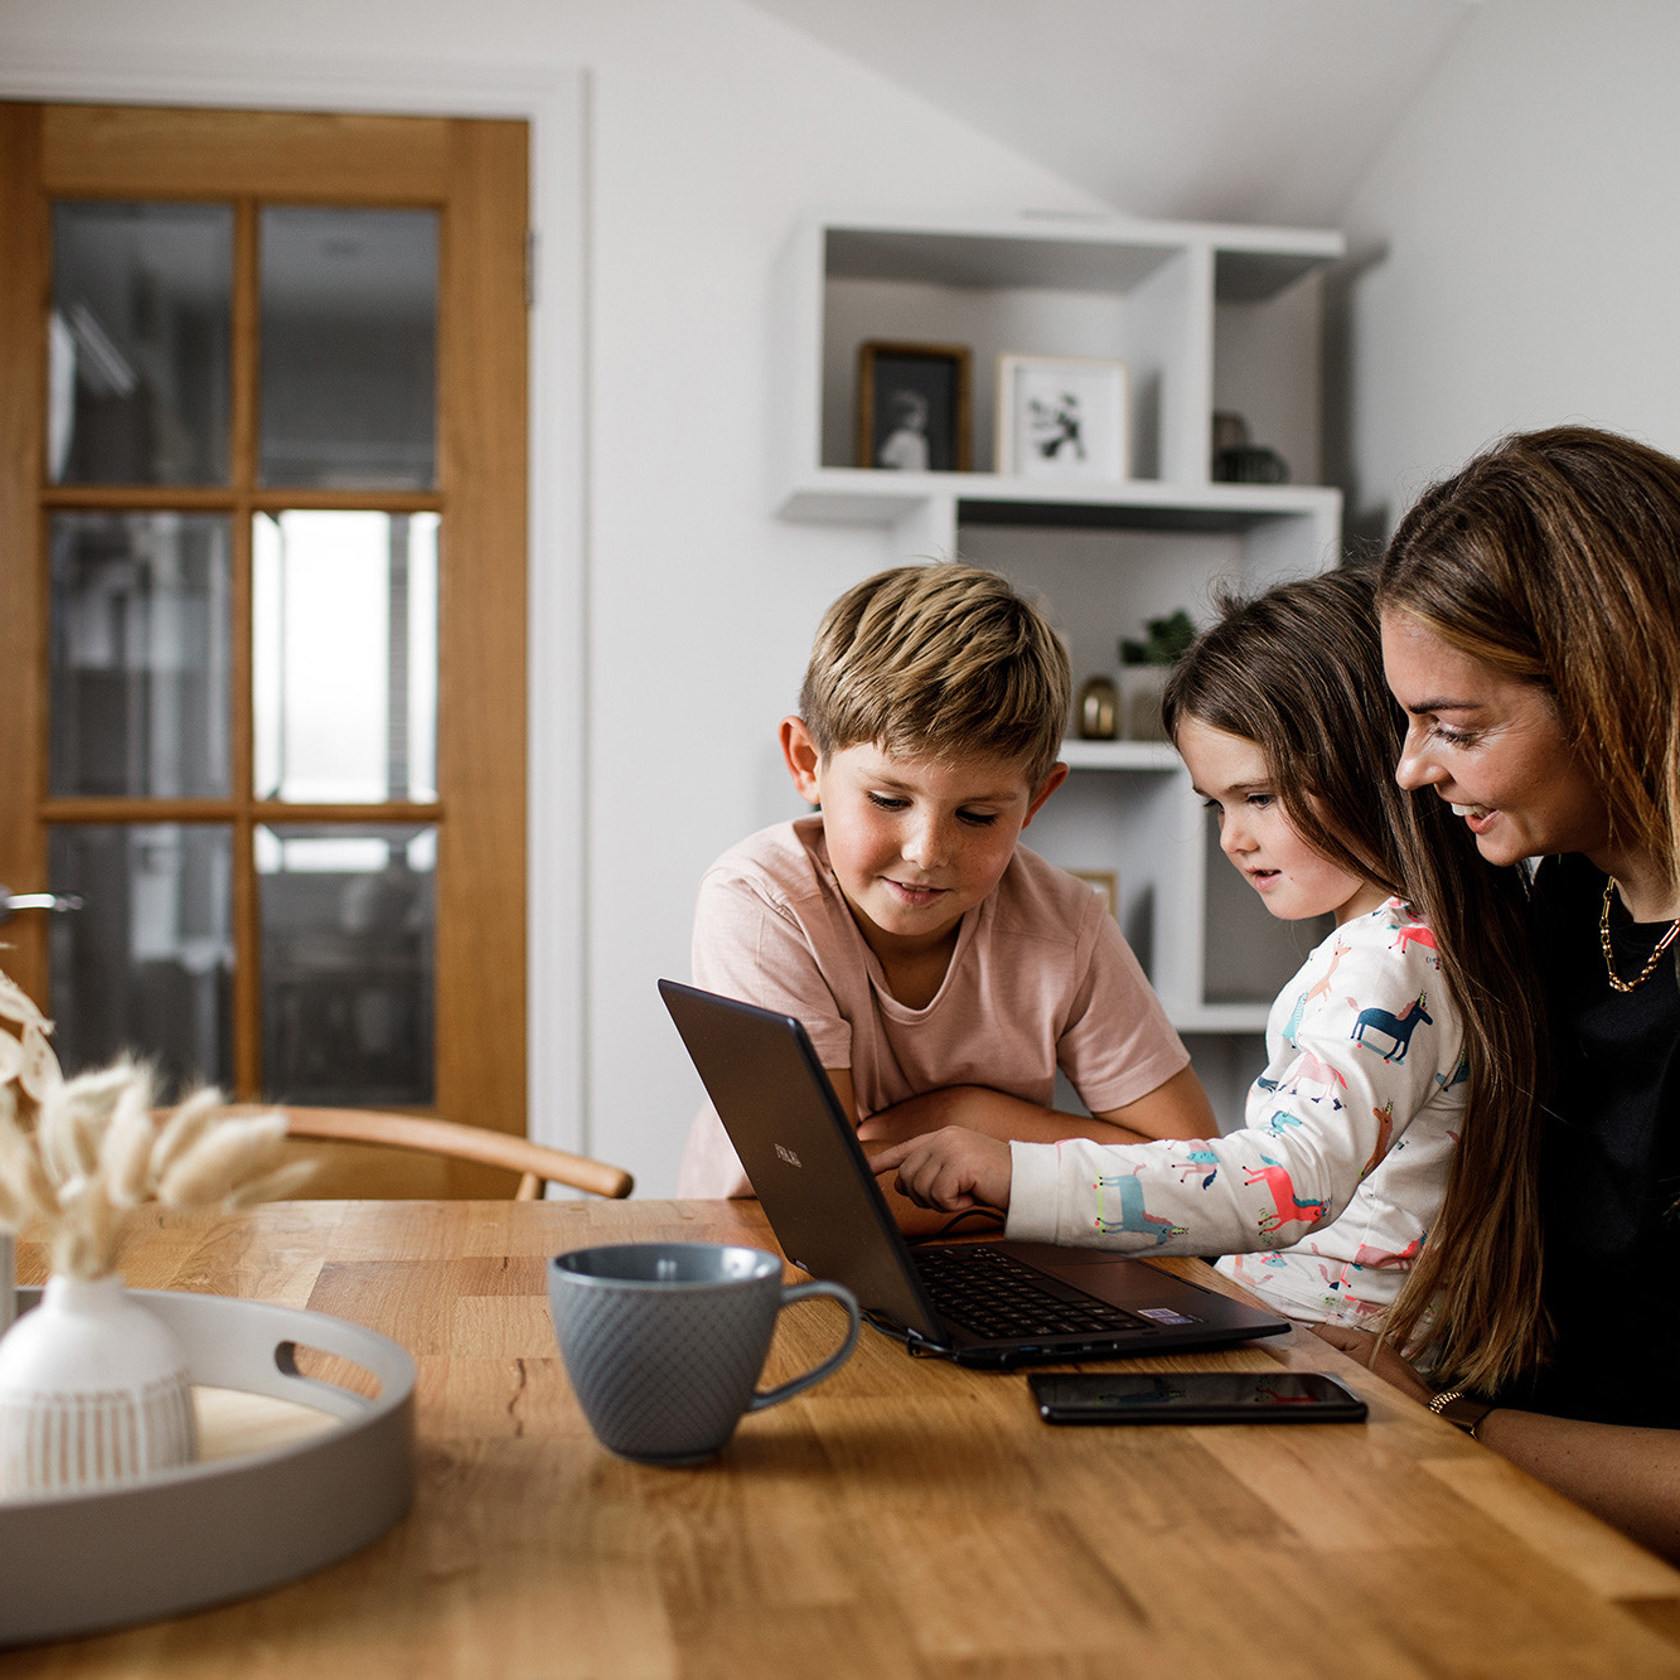 A mother and her children sat at the kitchen table enjoying something on a laptop computer.